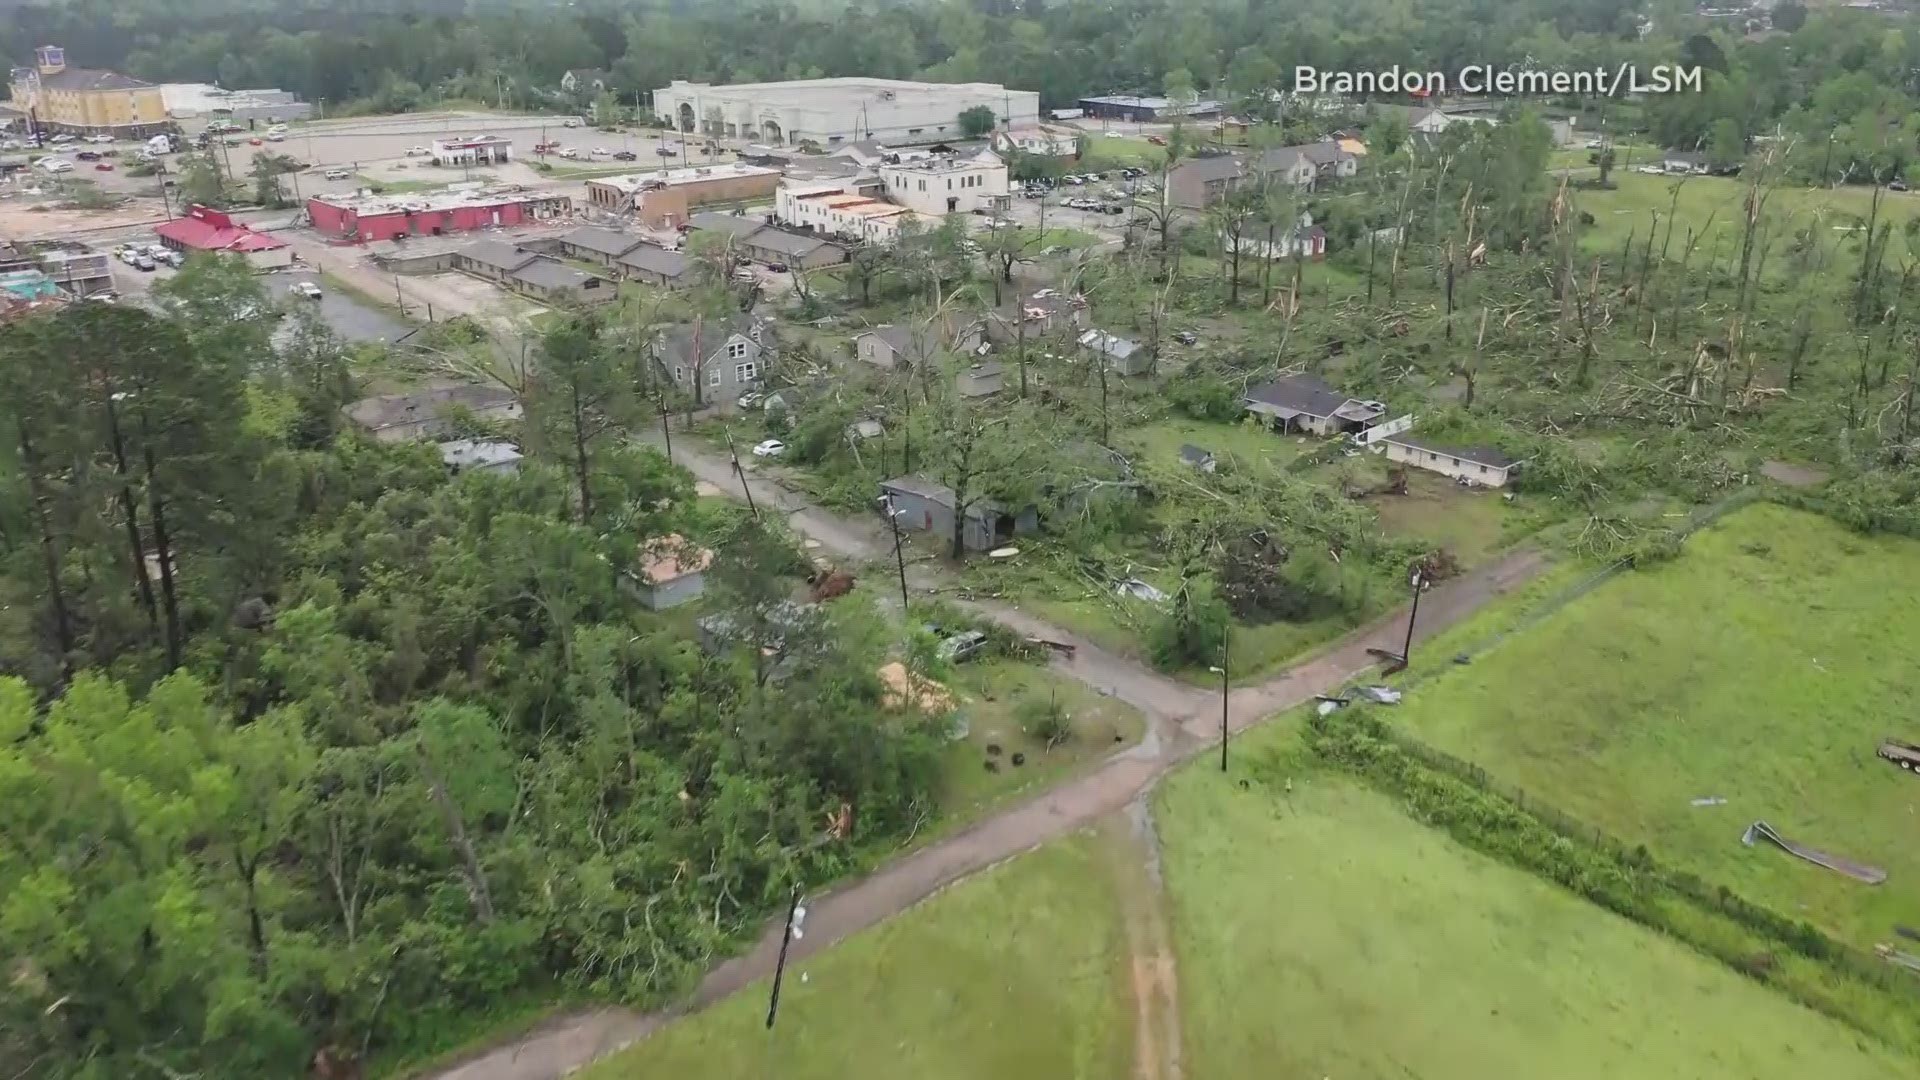 Drone video from Brandon Clement captured the extent of the damage in parts of Ruston where the National Weather Service says a tornado that was "at least an EF-3" struck.